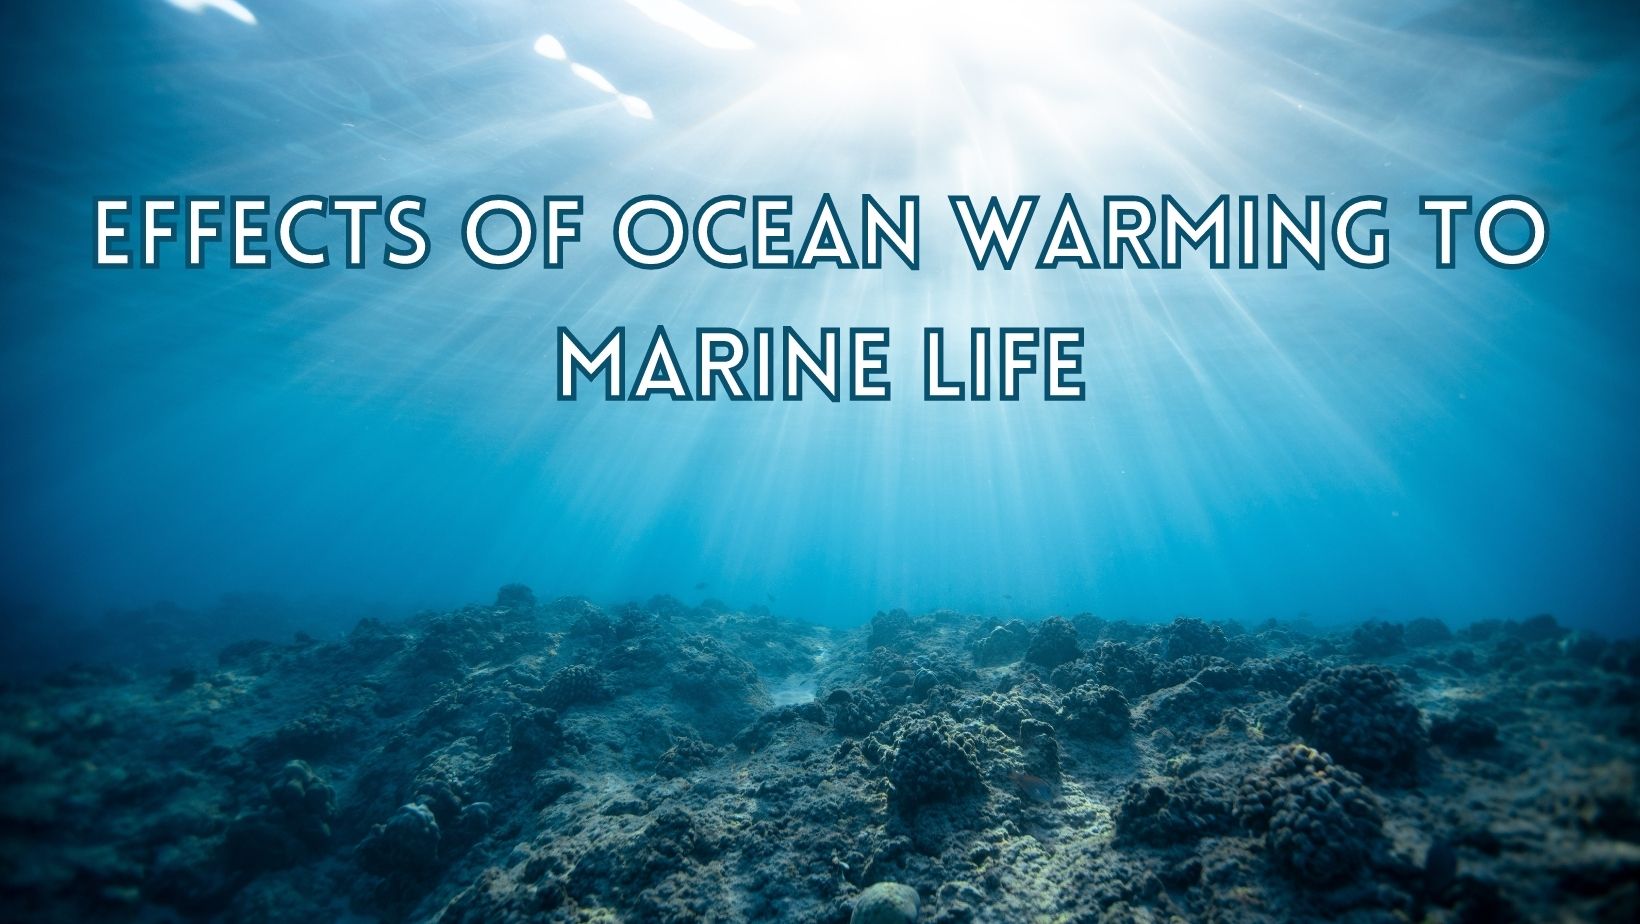 Ocean warming effects to marines